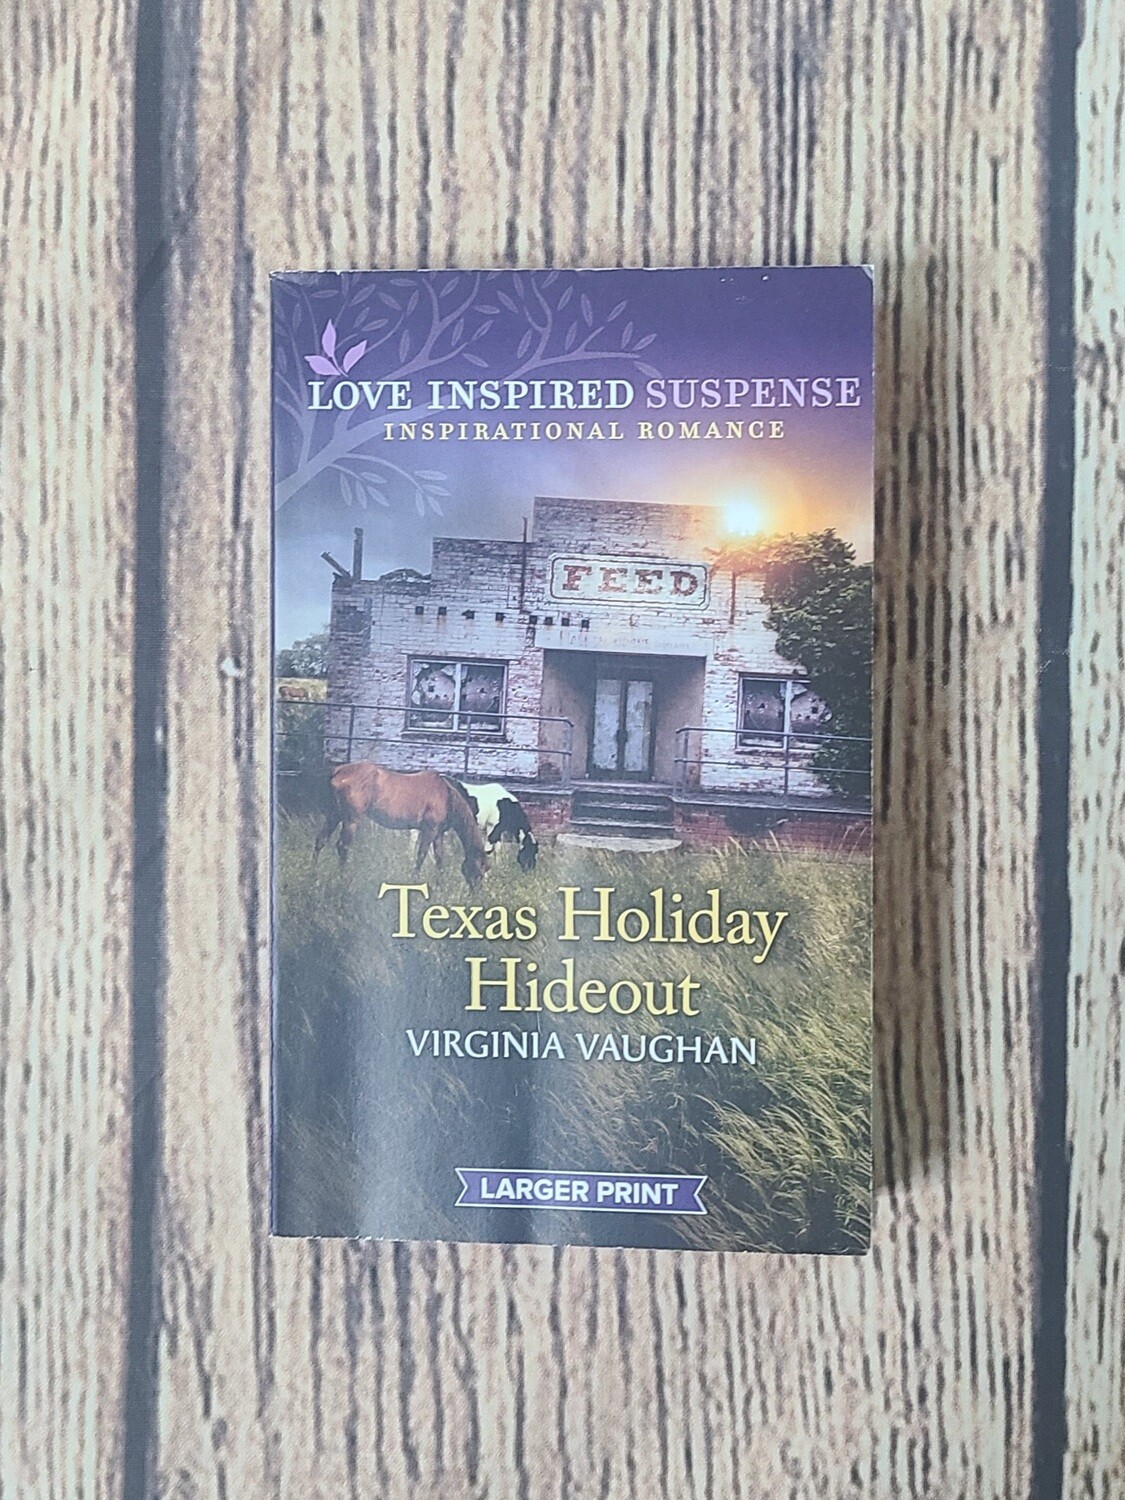 Texas Holiday Hideout by Virginia Vaughan - Great Condition